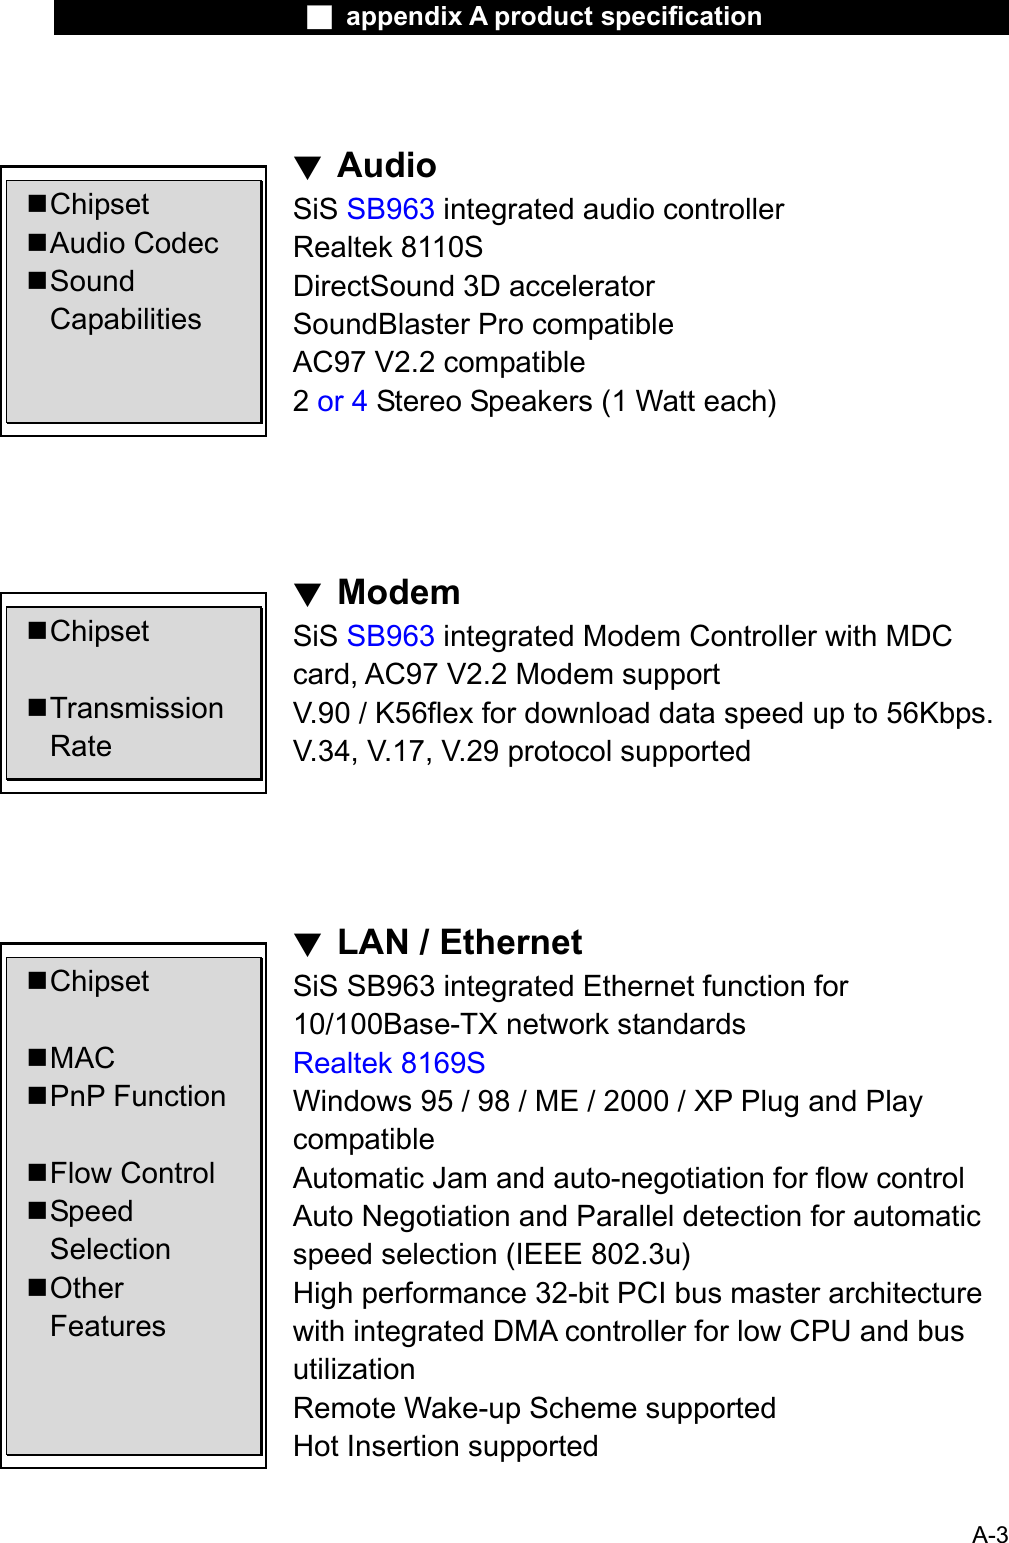 Ϯ appendix A product specificationϰAudioChipsetAudio CodecSound CapabilitiesChipsetTransmission Rate ChipsetMACPnP FunctionFlow ControlSpeed Selection Other Features SiS SB963 integrated audio controllerRealtek 8110SDirectSound 3D acceleratorSoundBlaster Pro compatibleAC97 V2.2 compatible2or 4 Stereo Speakers (1 Watt each)ϰModemSiS SB963 integrated Modem Controller with MDC card, AC97 V2.2 Modem supportV.90 / K56flex for download data speed up to 56Kbps.V.34, V.17, V.29 protocol supportedϰLAN / EthernetSiS SB963 integrated Ethernet function for 10/100Base-TX network standardsRealtek 8169SWindows 95 / 98 / ME / 2000 / XP Plug and Play compatibleAutomatic Jam and auto-negotiation for flow controlAuto Negotiation and Parallel detection for automaticspeed selection (IEEE 802.3u) High performance 32-bit PCI bus master architecturewith integrated DMA controller for low CPU and busutilizationRemote Wake-up Scheme supportedHot Insertion supportedA-3